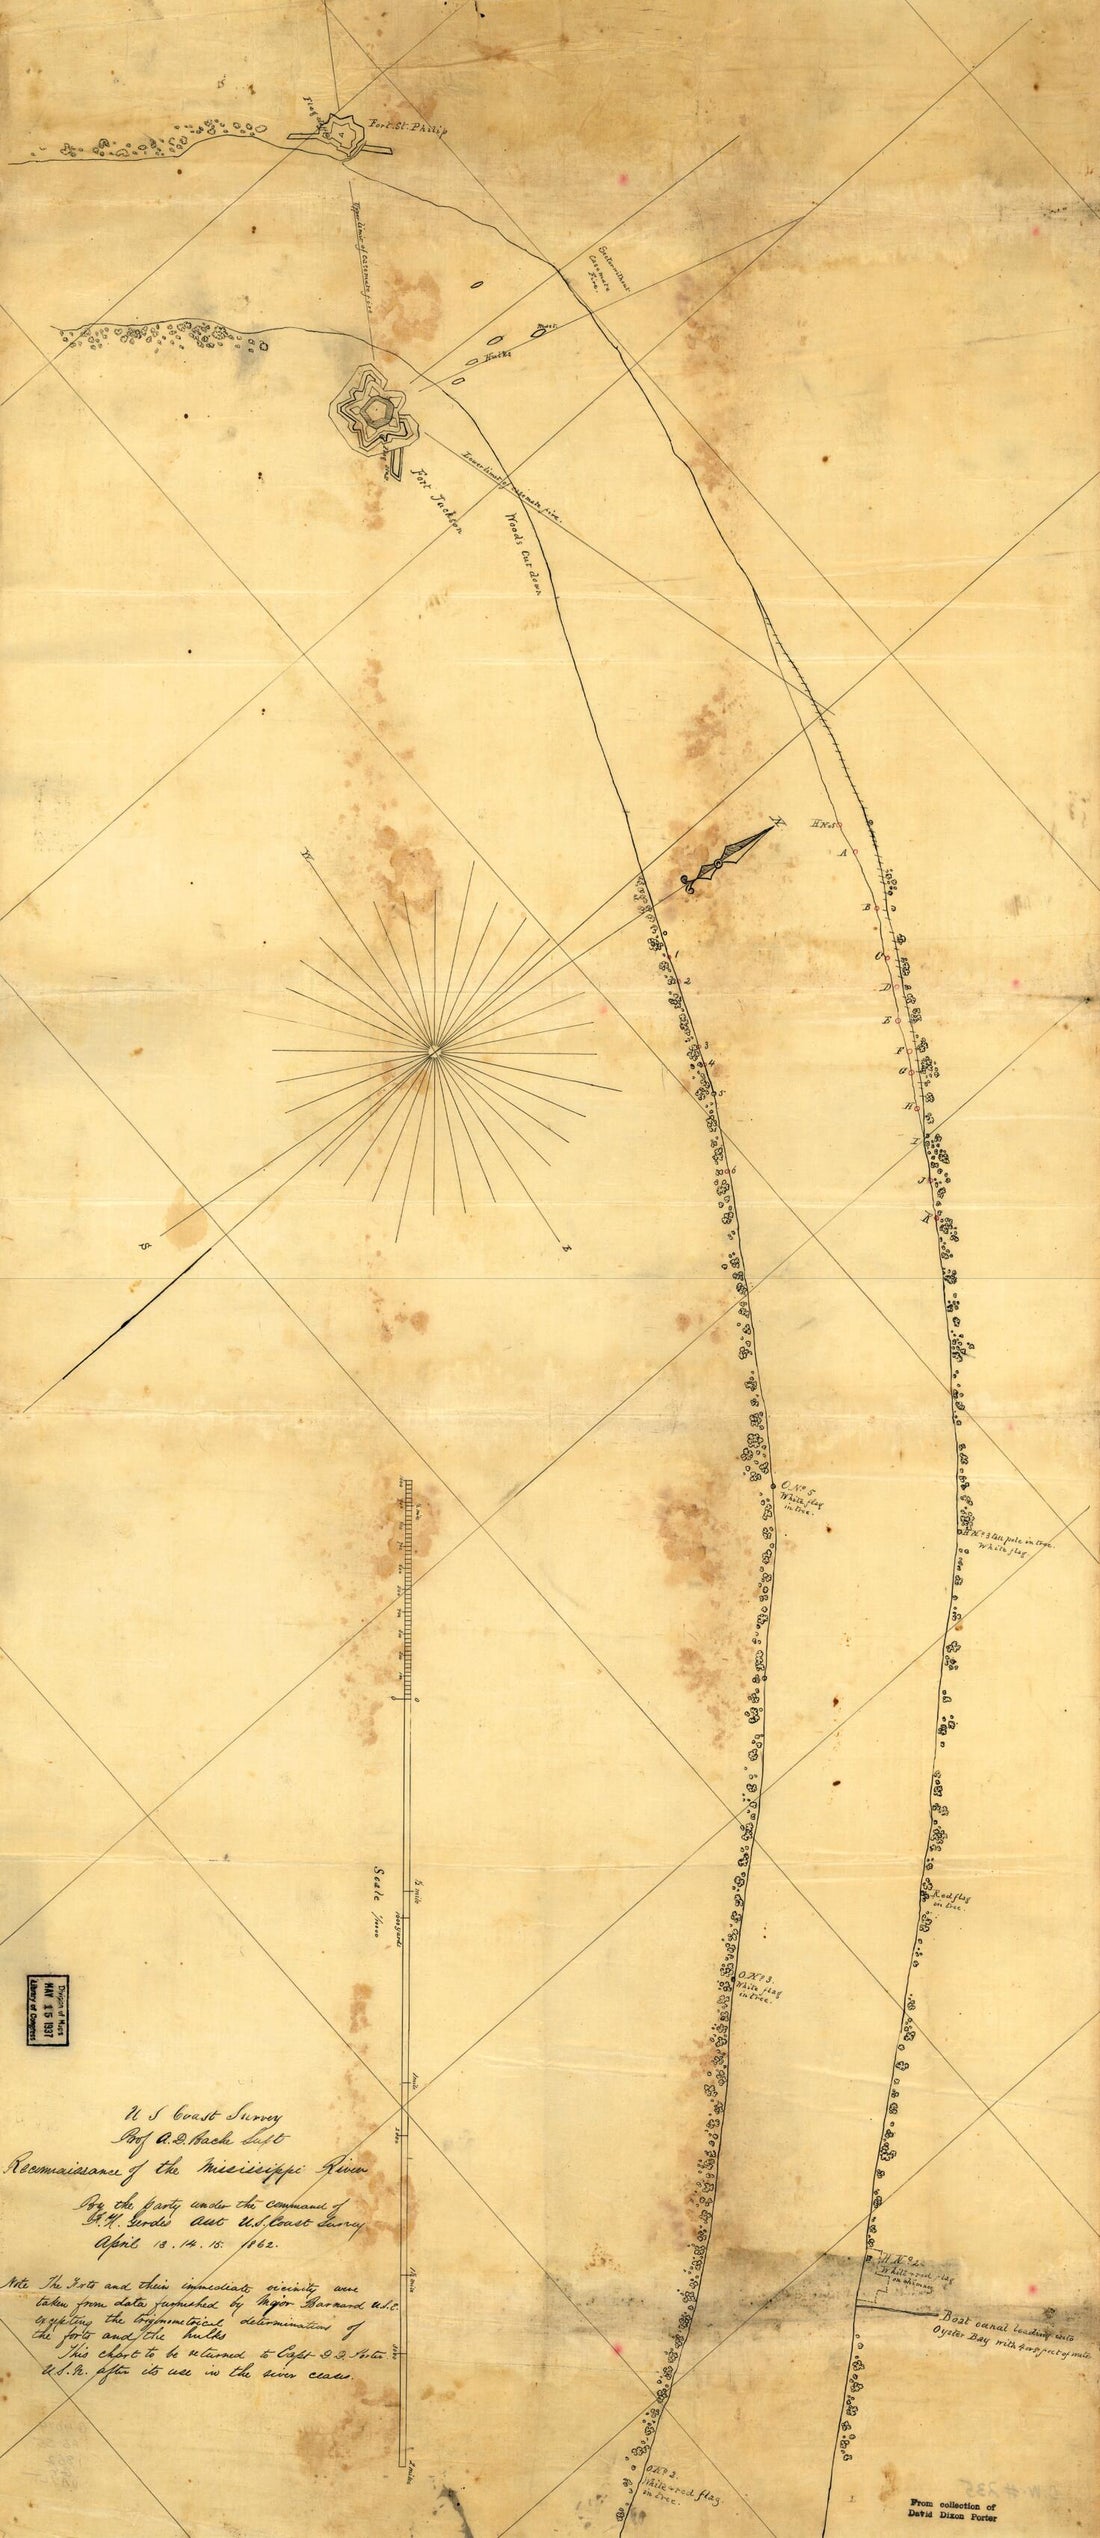 This old map of Reconnoissance of the Mississippi River Below Forts Jackson and St. Philip : Made Previous to the Reduction by the U.S. Fleet, Under the Command of Flag Officer D.G. Farragut, U.S.N from 1862 was created by A. D. (Alexander Dallas) Bache,